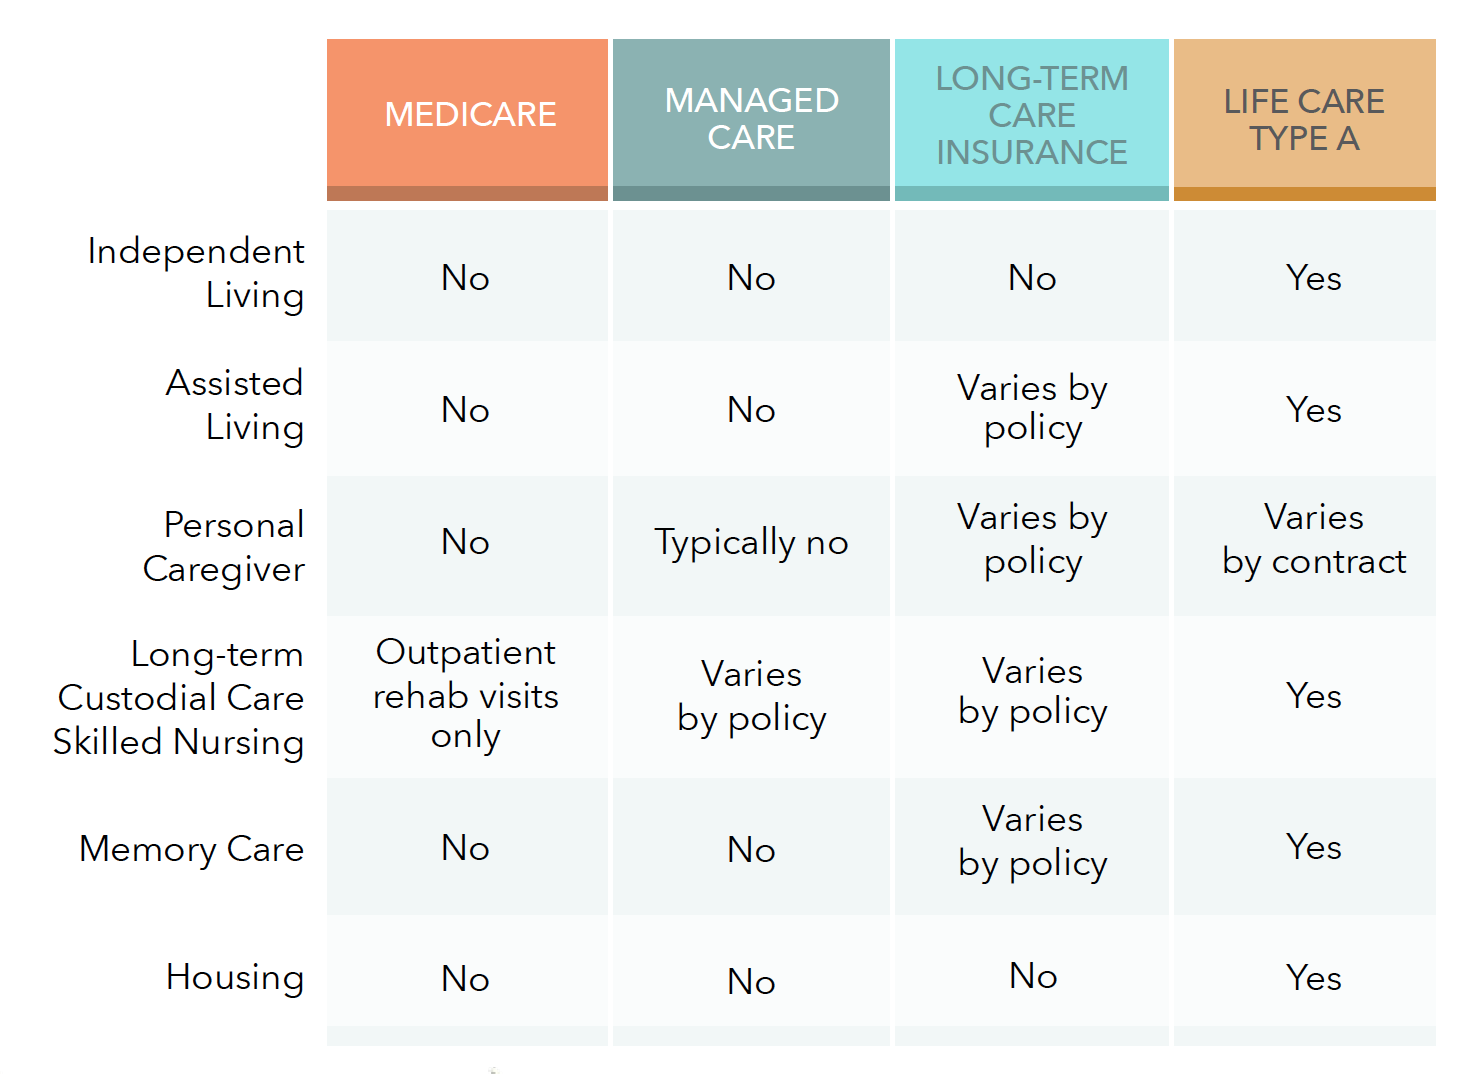 Explanation of services that are and are not covered by different types of healthcare insurance